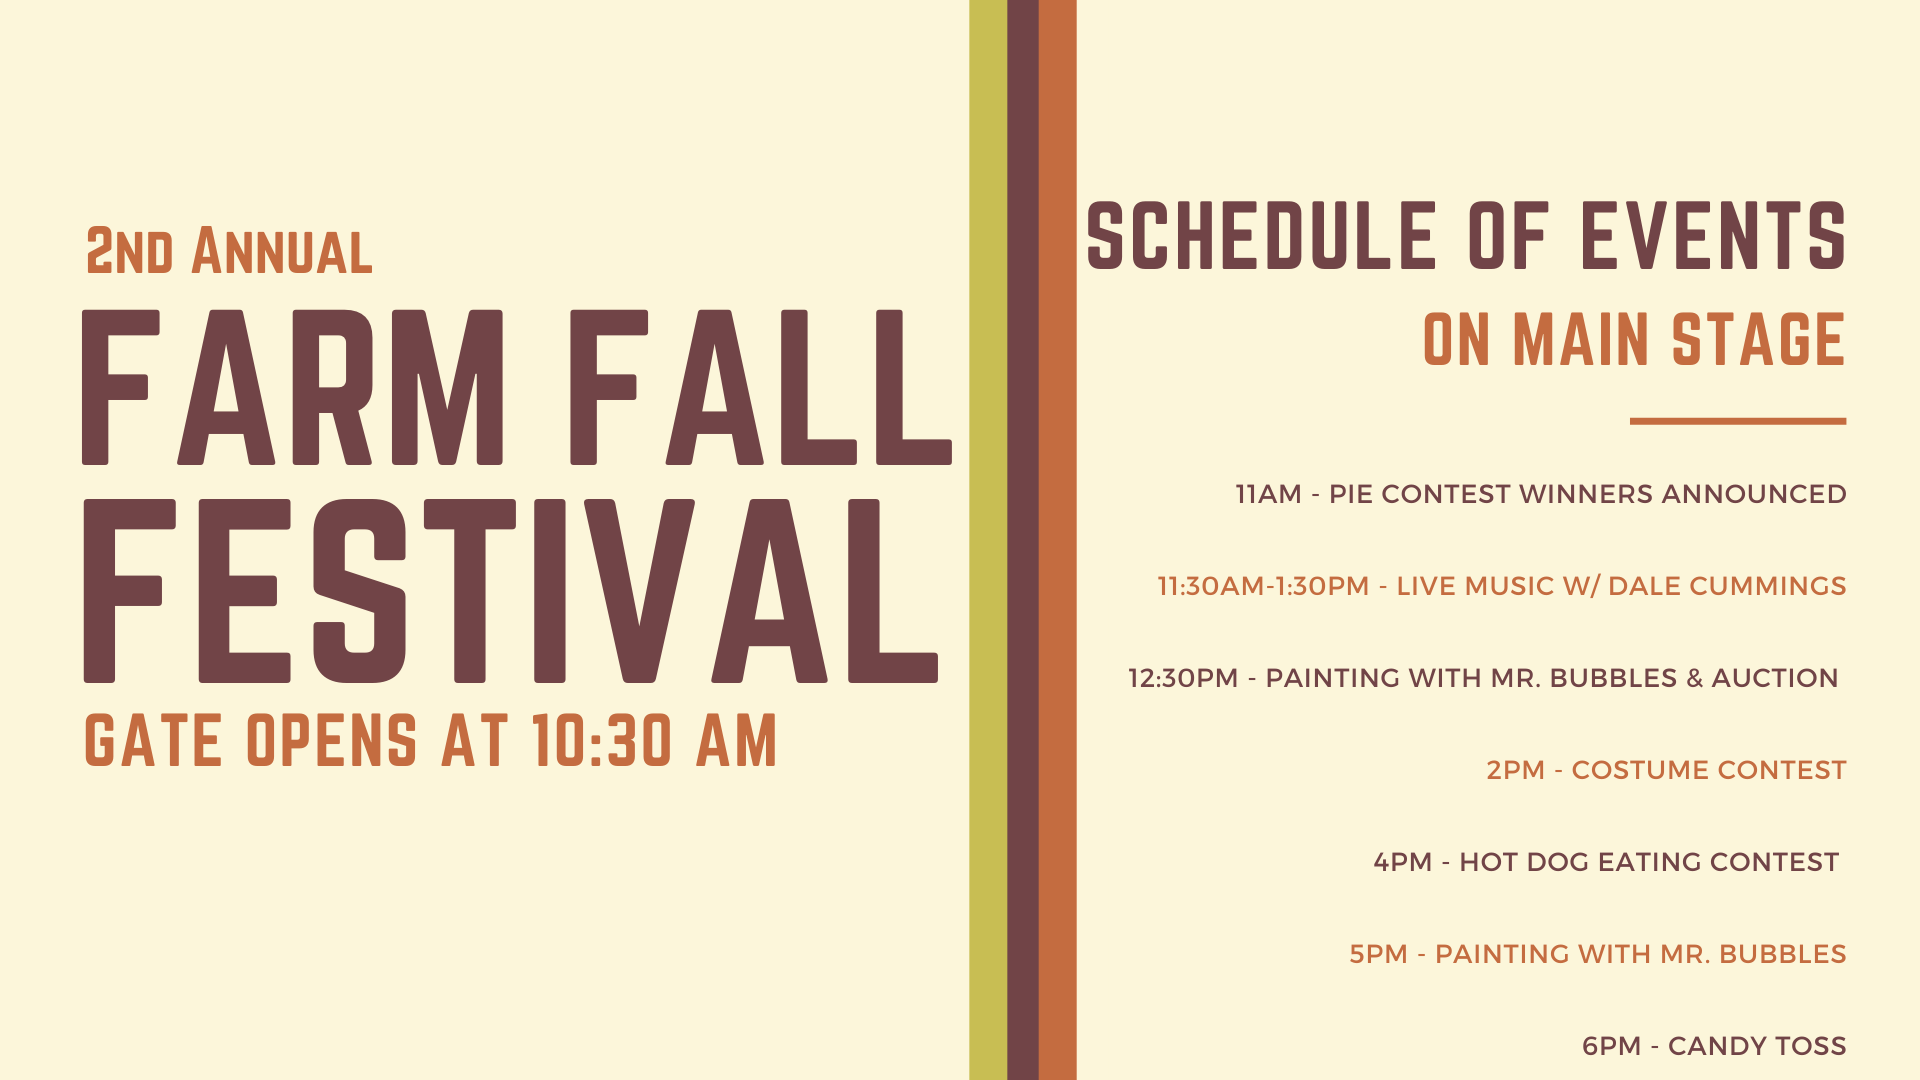 Copy of 2nd Annual Farm Fall Festival Schedule of Events (1).png